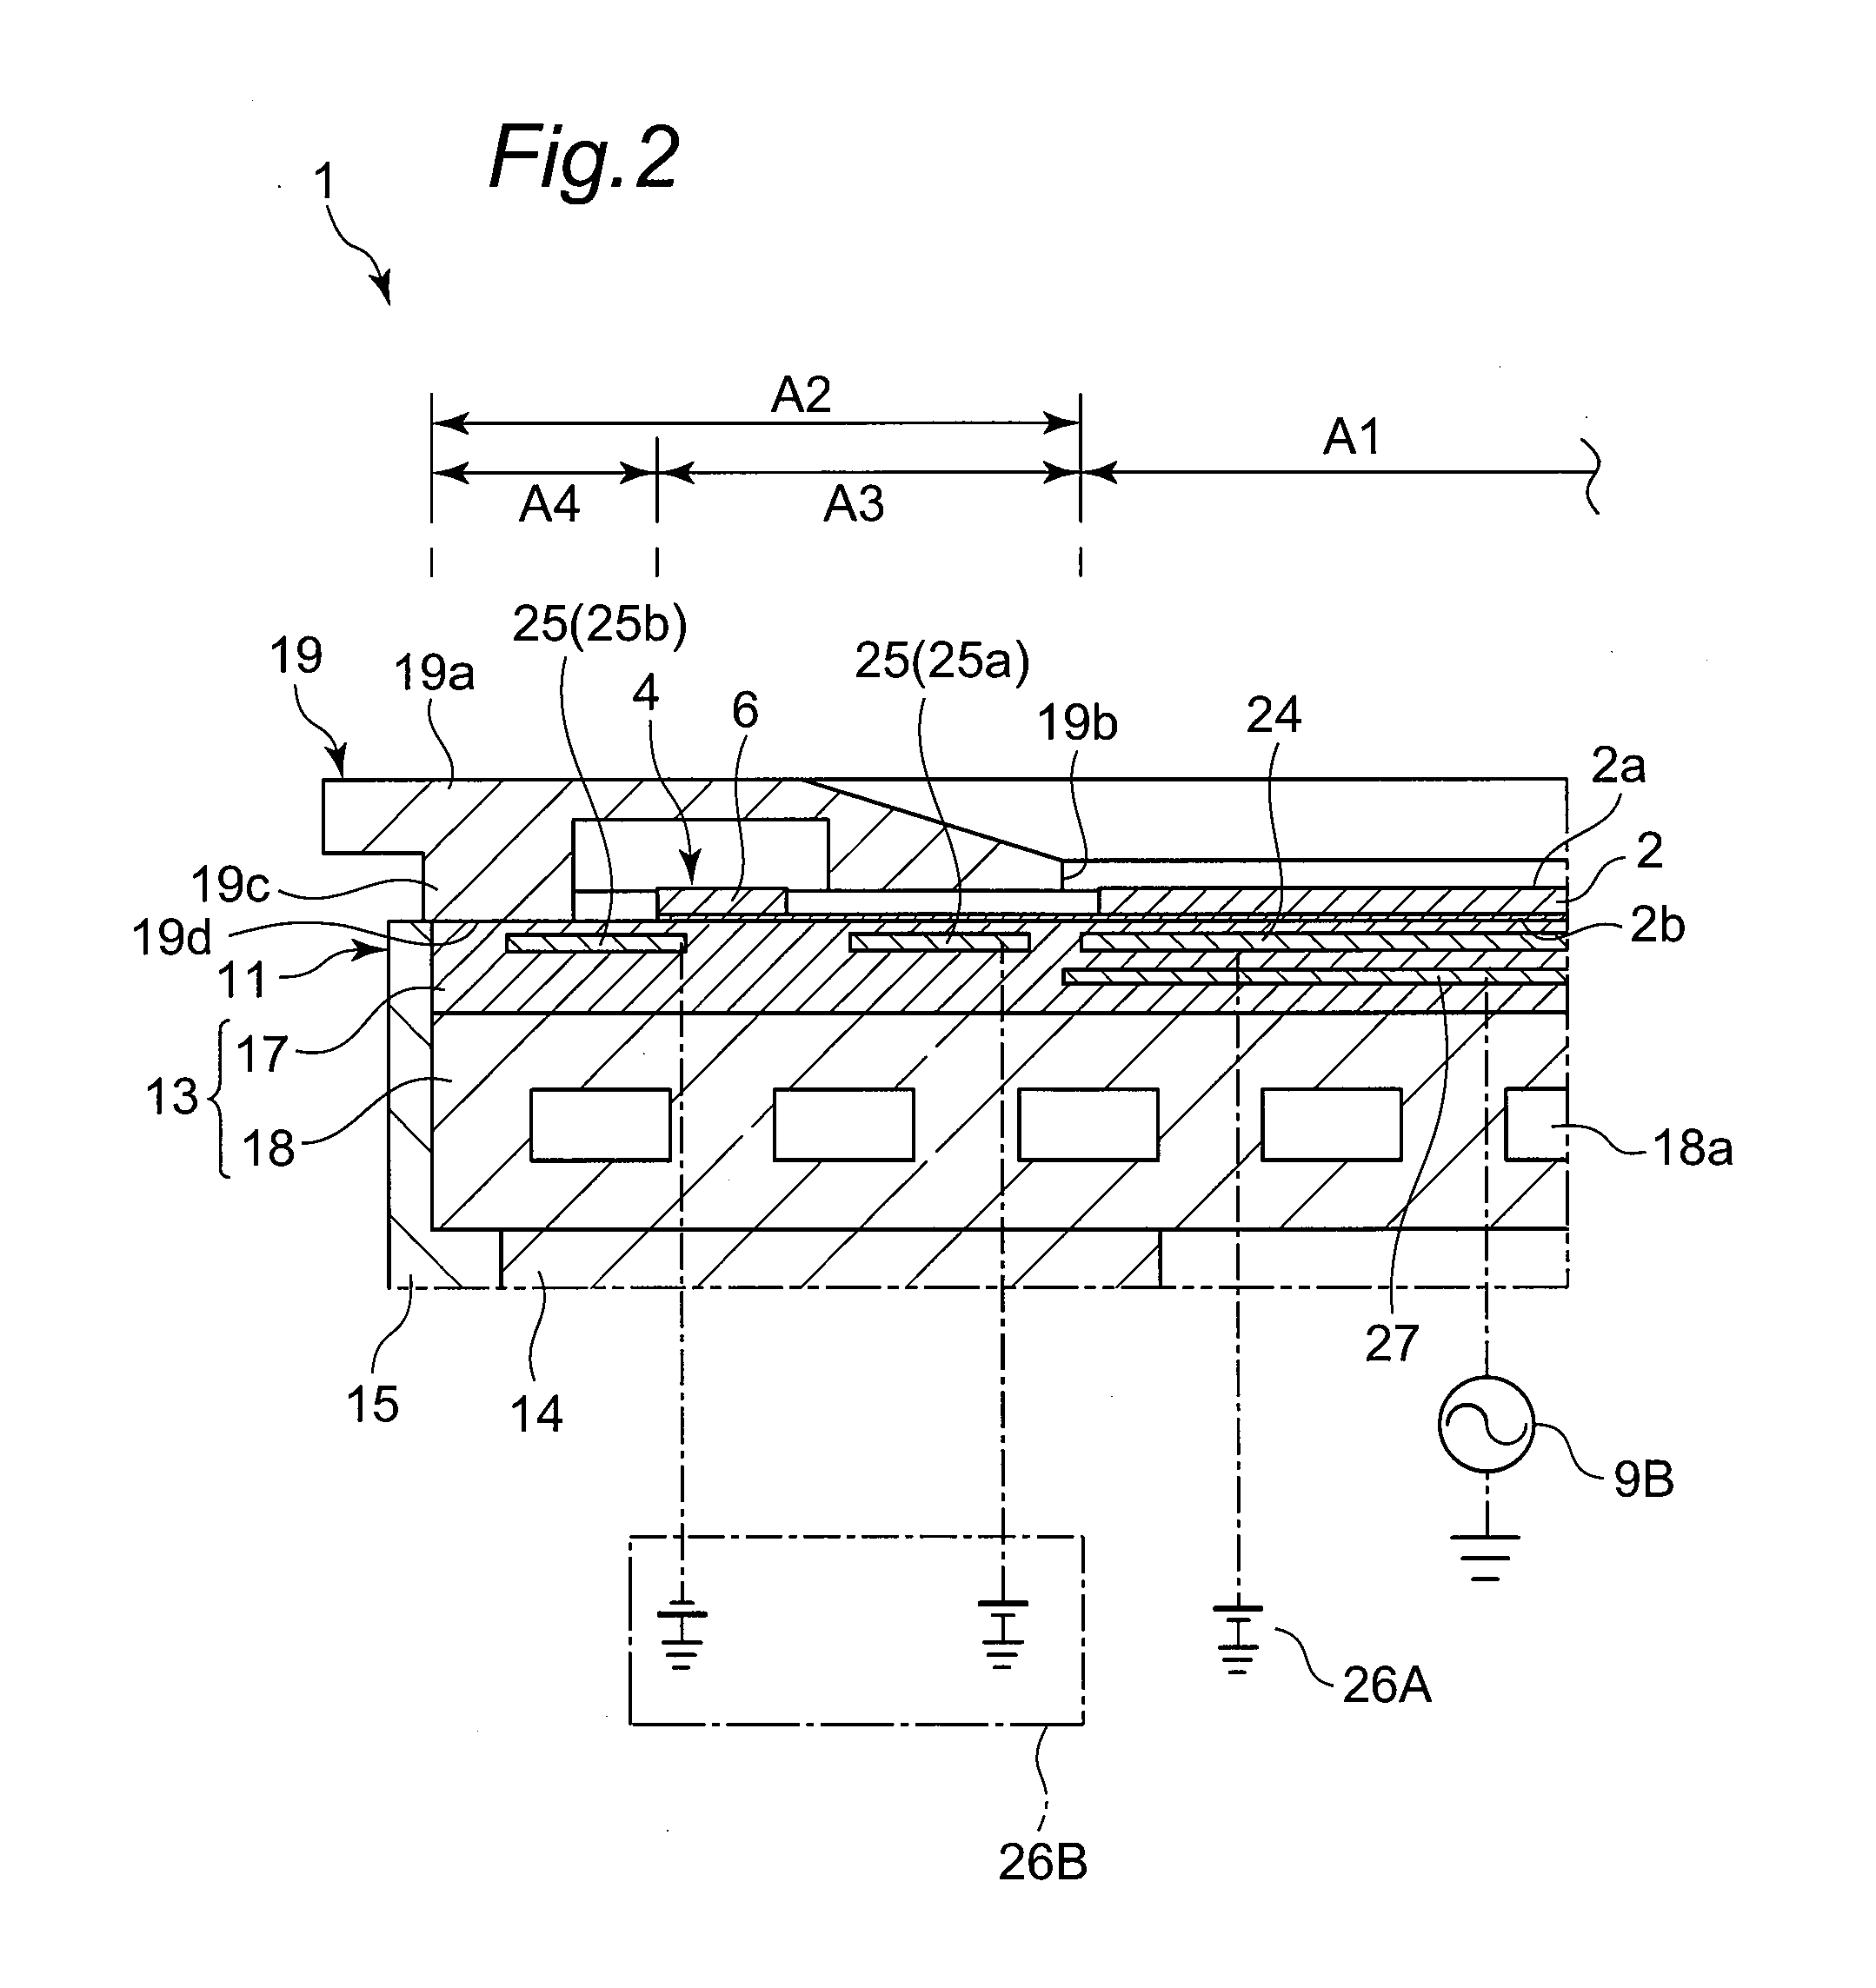 Plasma processing apparatus and method therefor